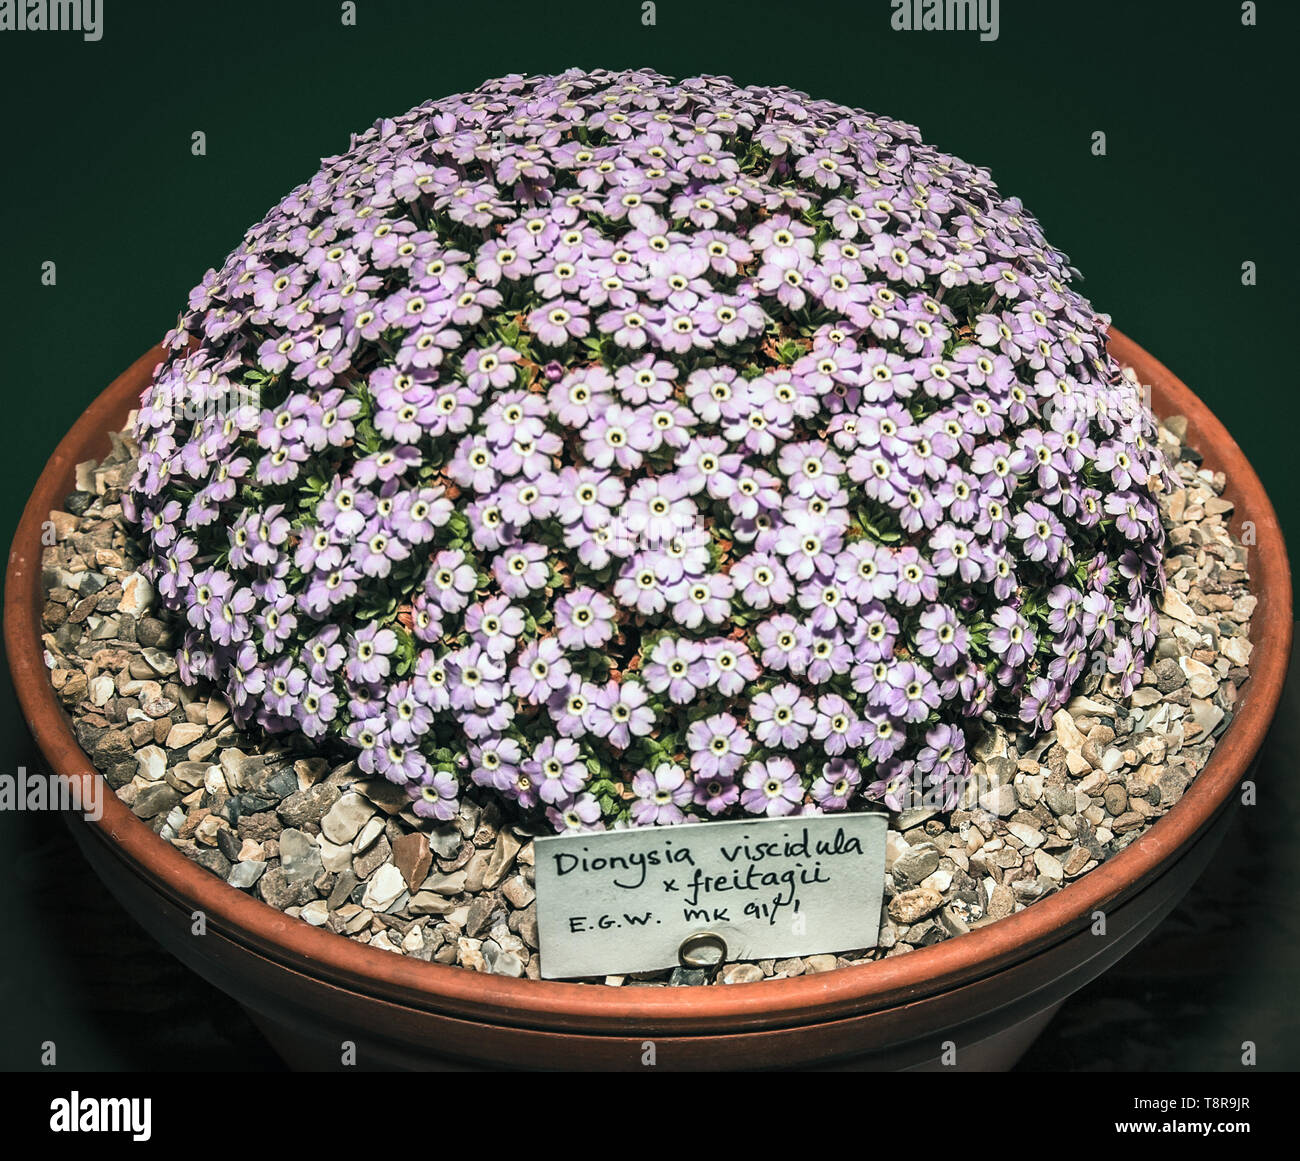 Dionysia viscidula x freitagii a hardy alpine plant suitable for containers or rockeries.In bloom in March. Stock Photo